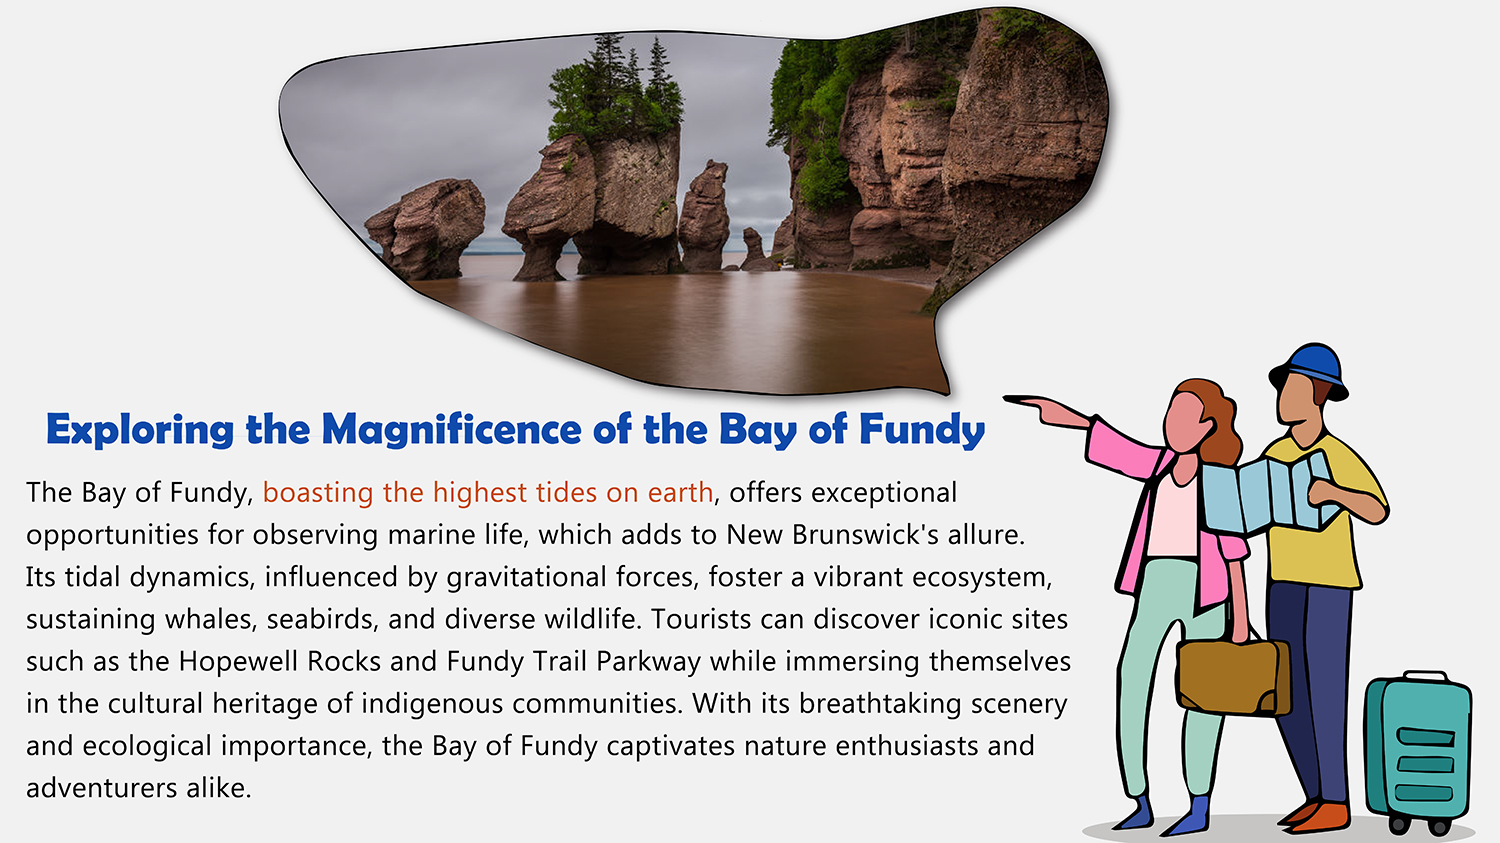 Exploring the Magnificence of the Bay of Fundy, New Brunswick, Canada